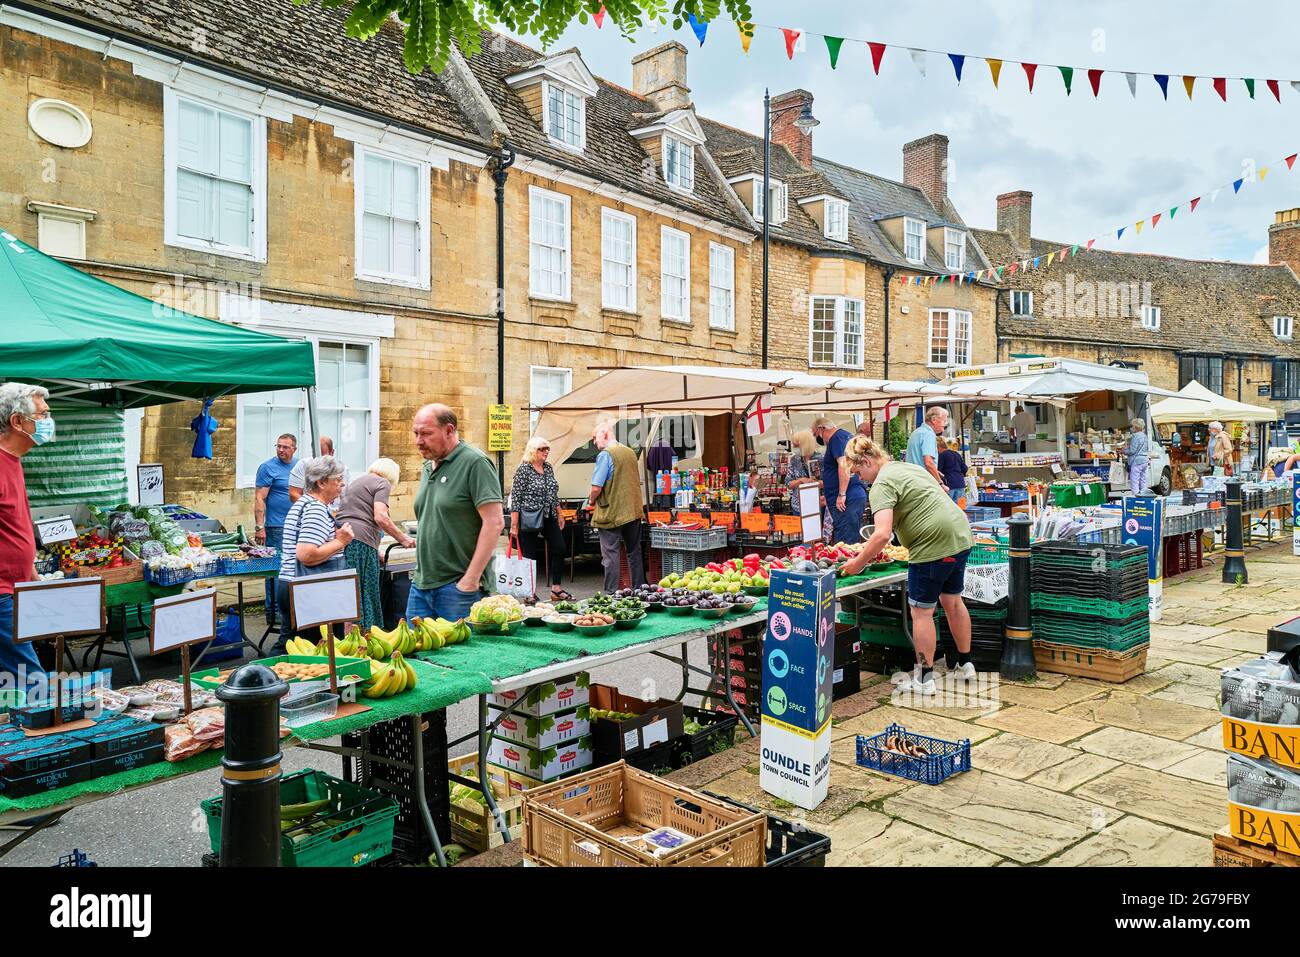 Market day in the market town of Oundle, England. Stock Photo